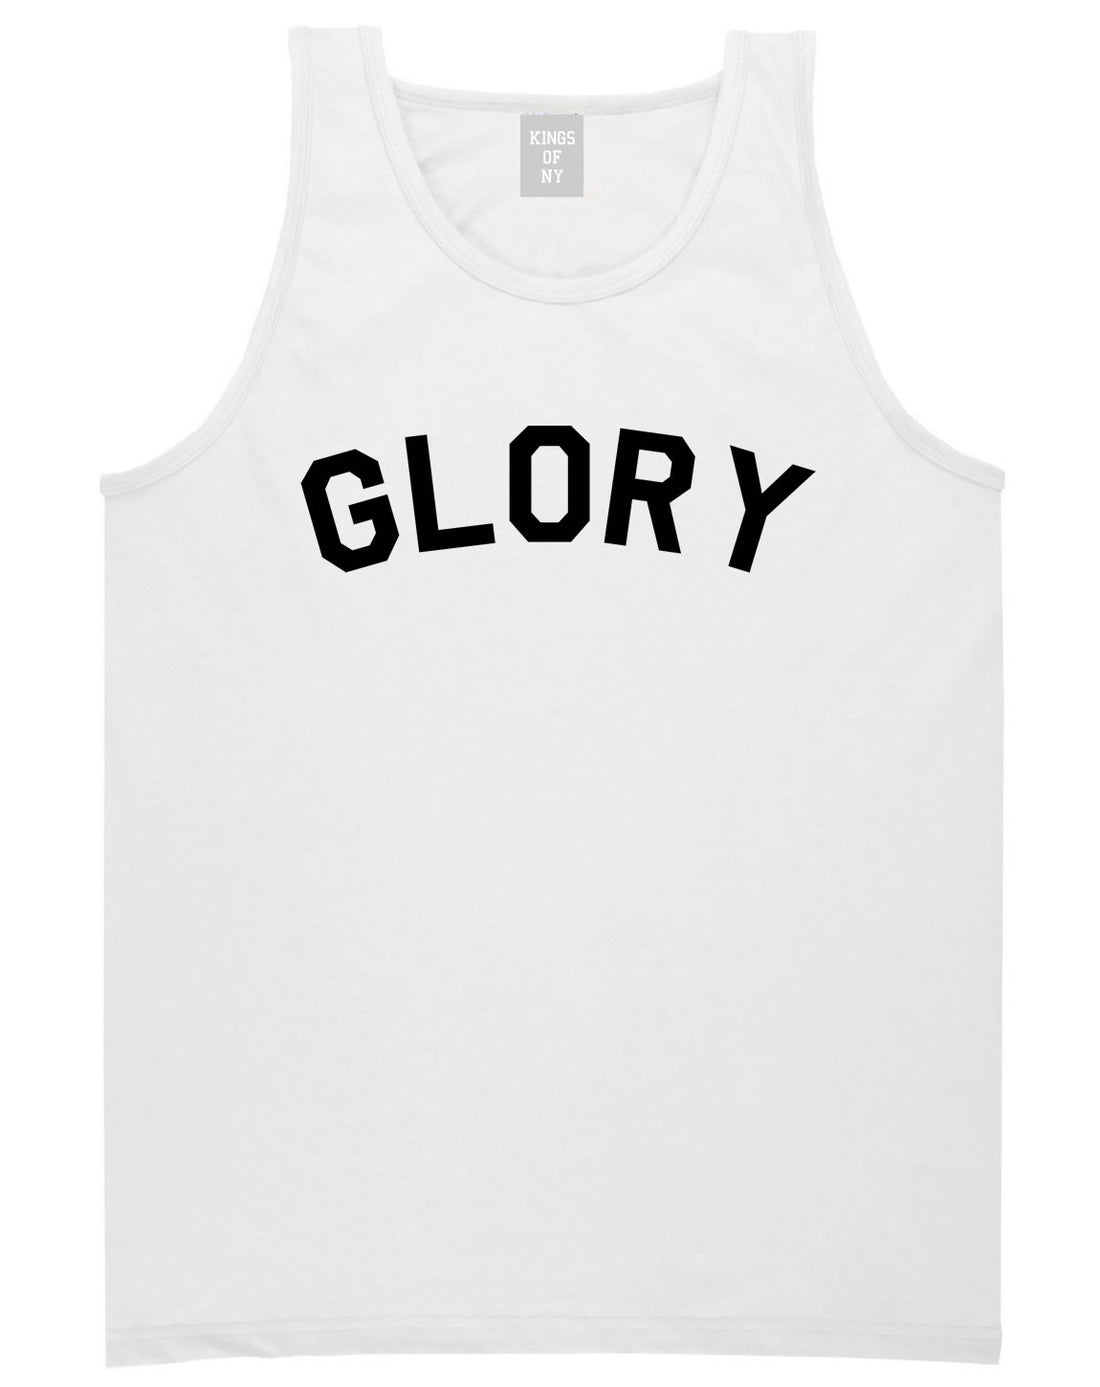 GLORY New York Champs Jersey Tank Top in White